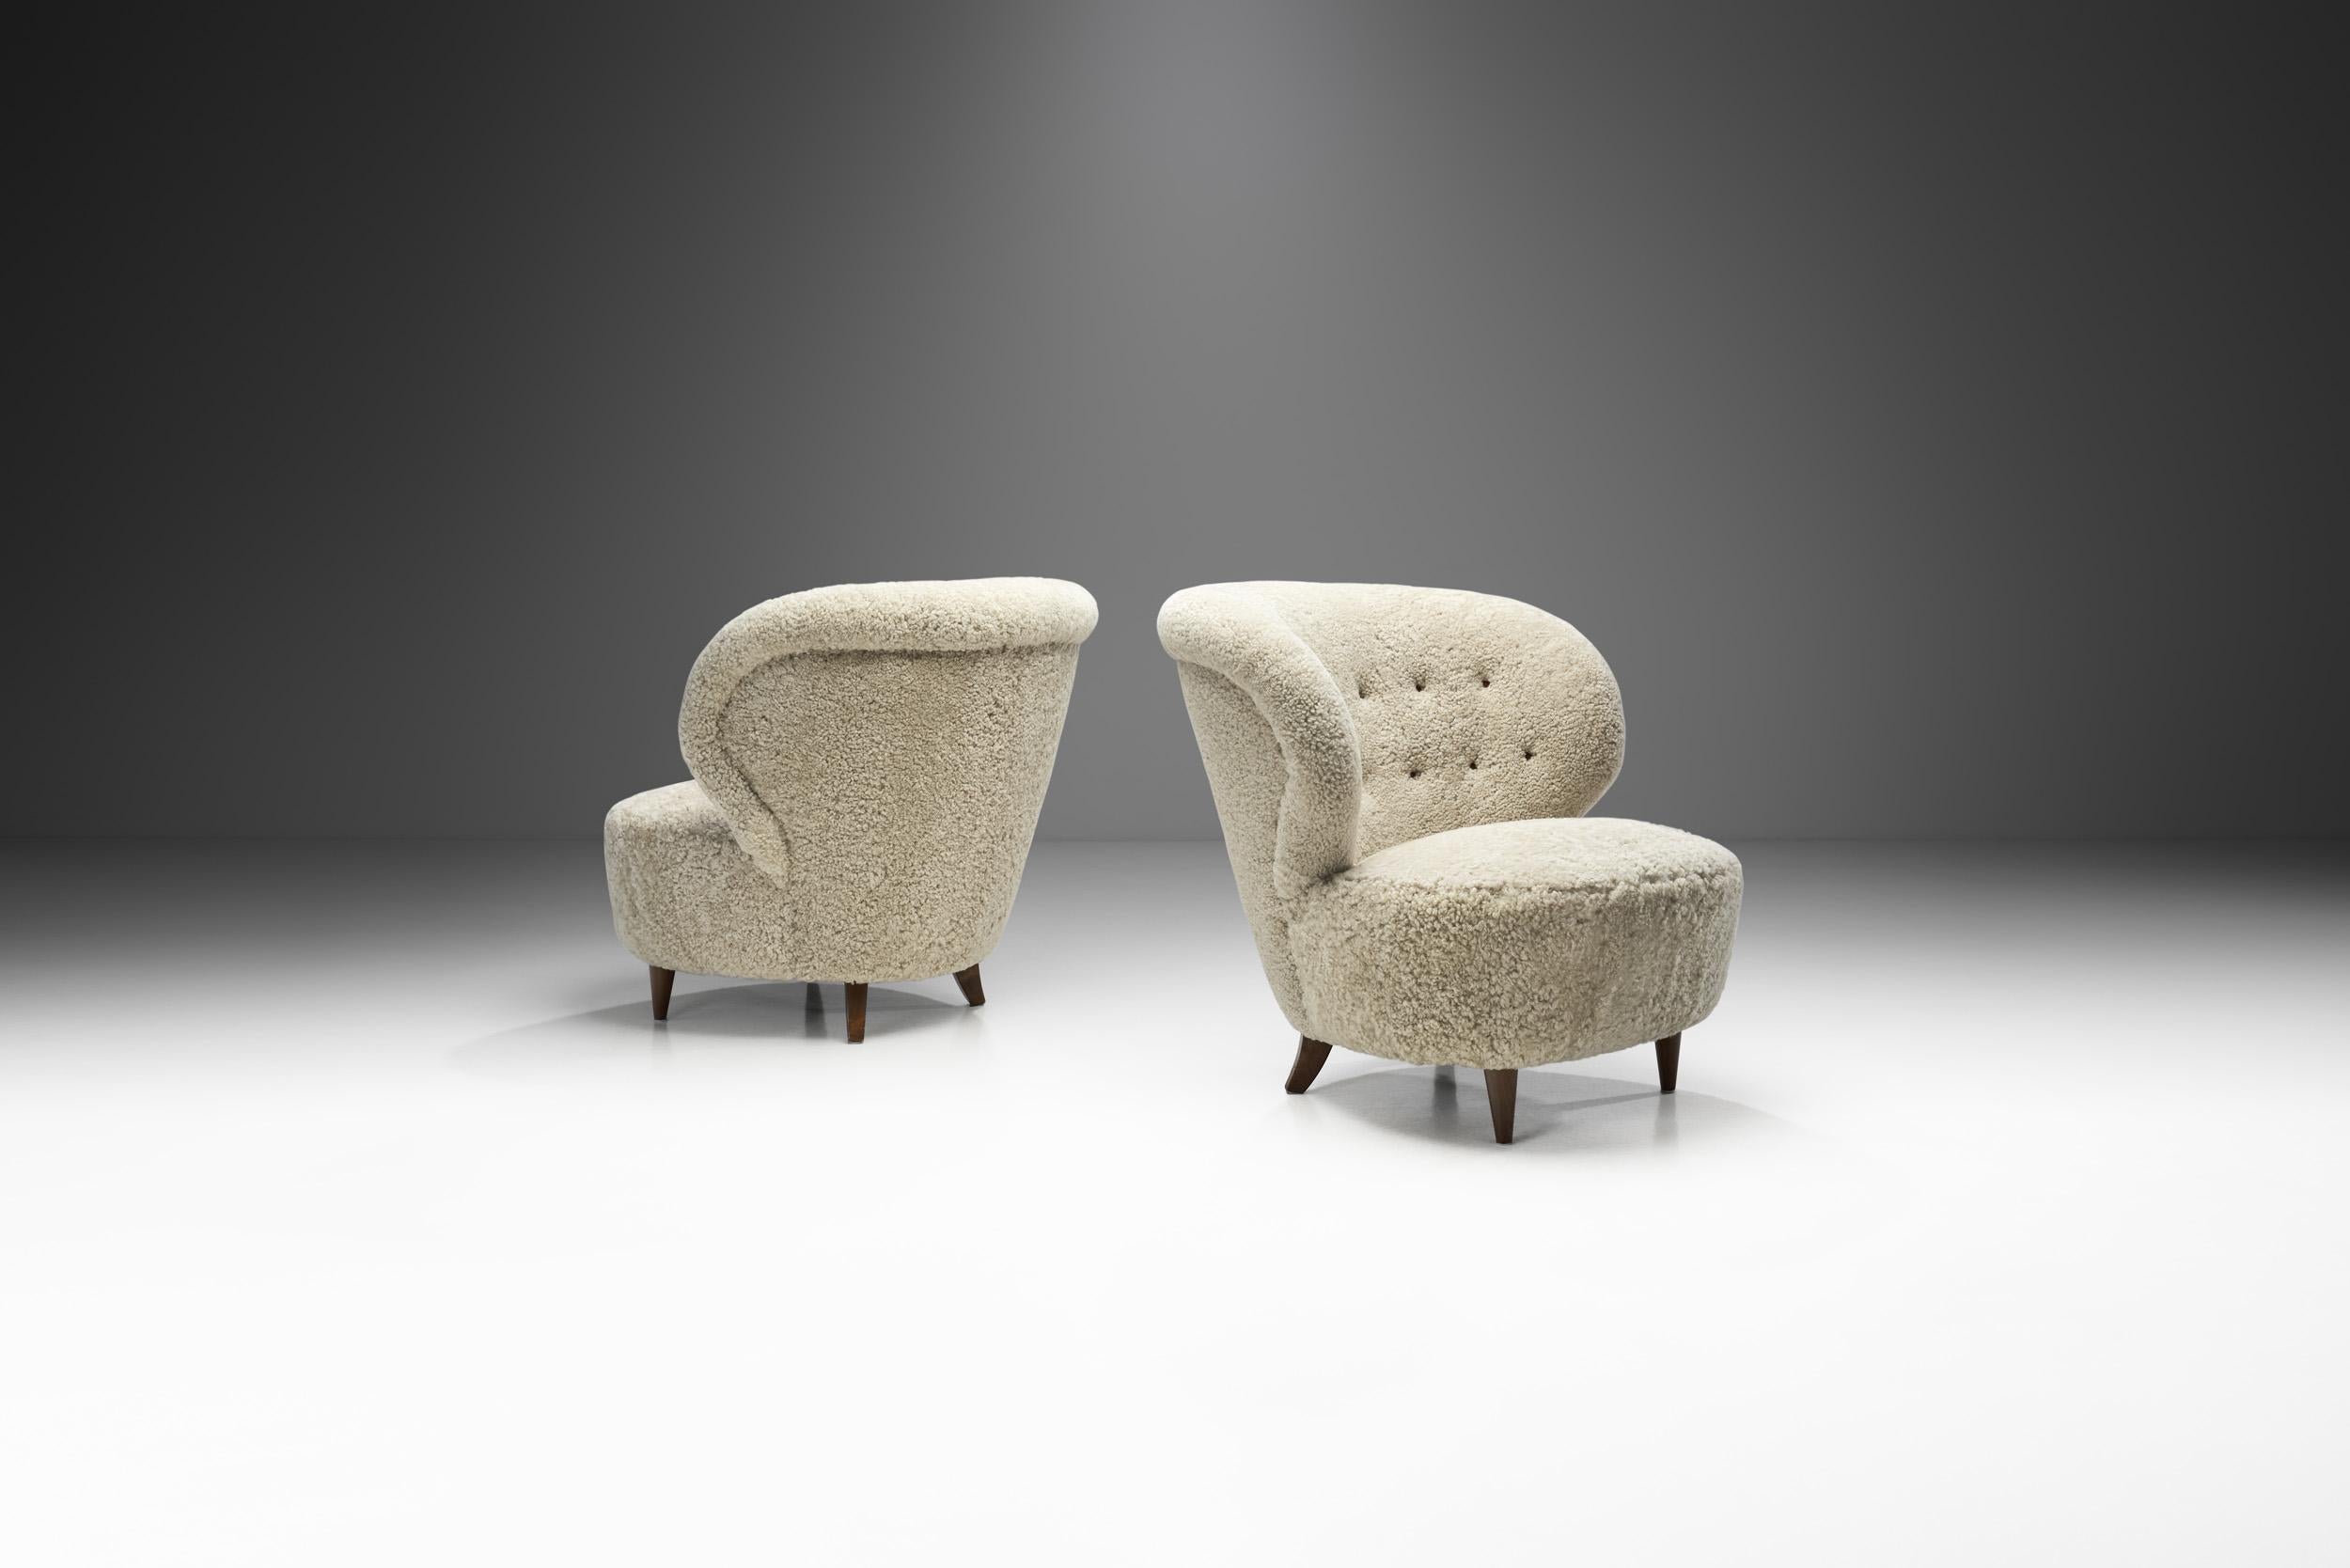 “Danish Modern” is a recognized term around the world, standing for the characteristic style of Danish design created during the 20th century. As these lounge chairs show, furniture created in this period are characterized by clarity in design, and